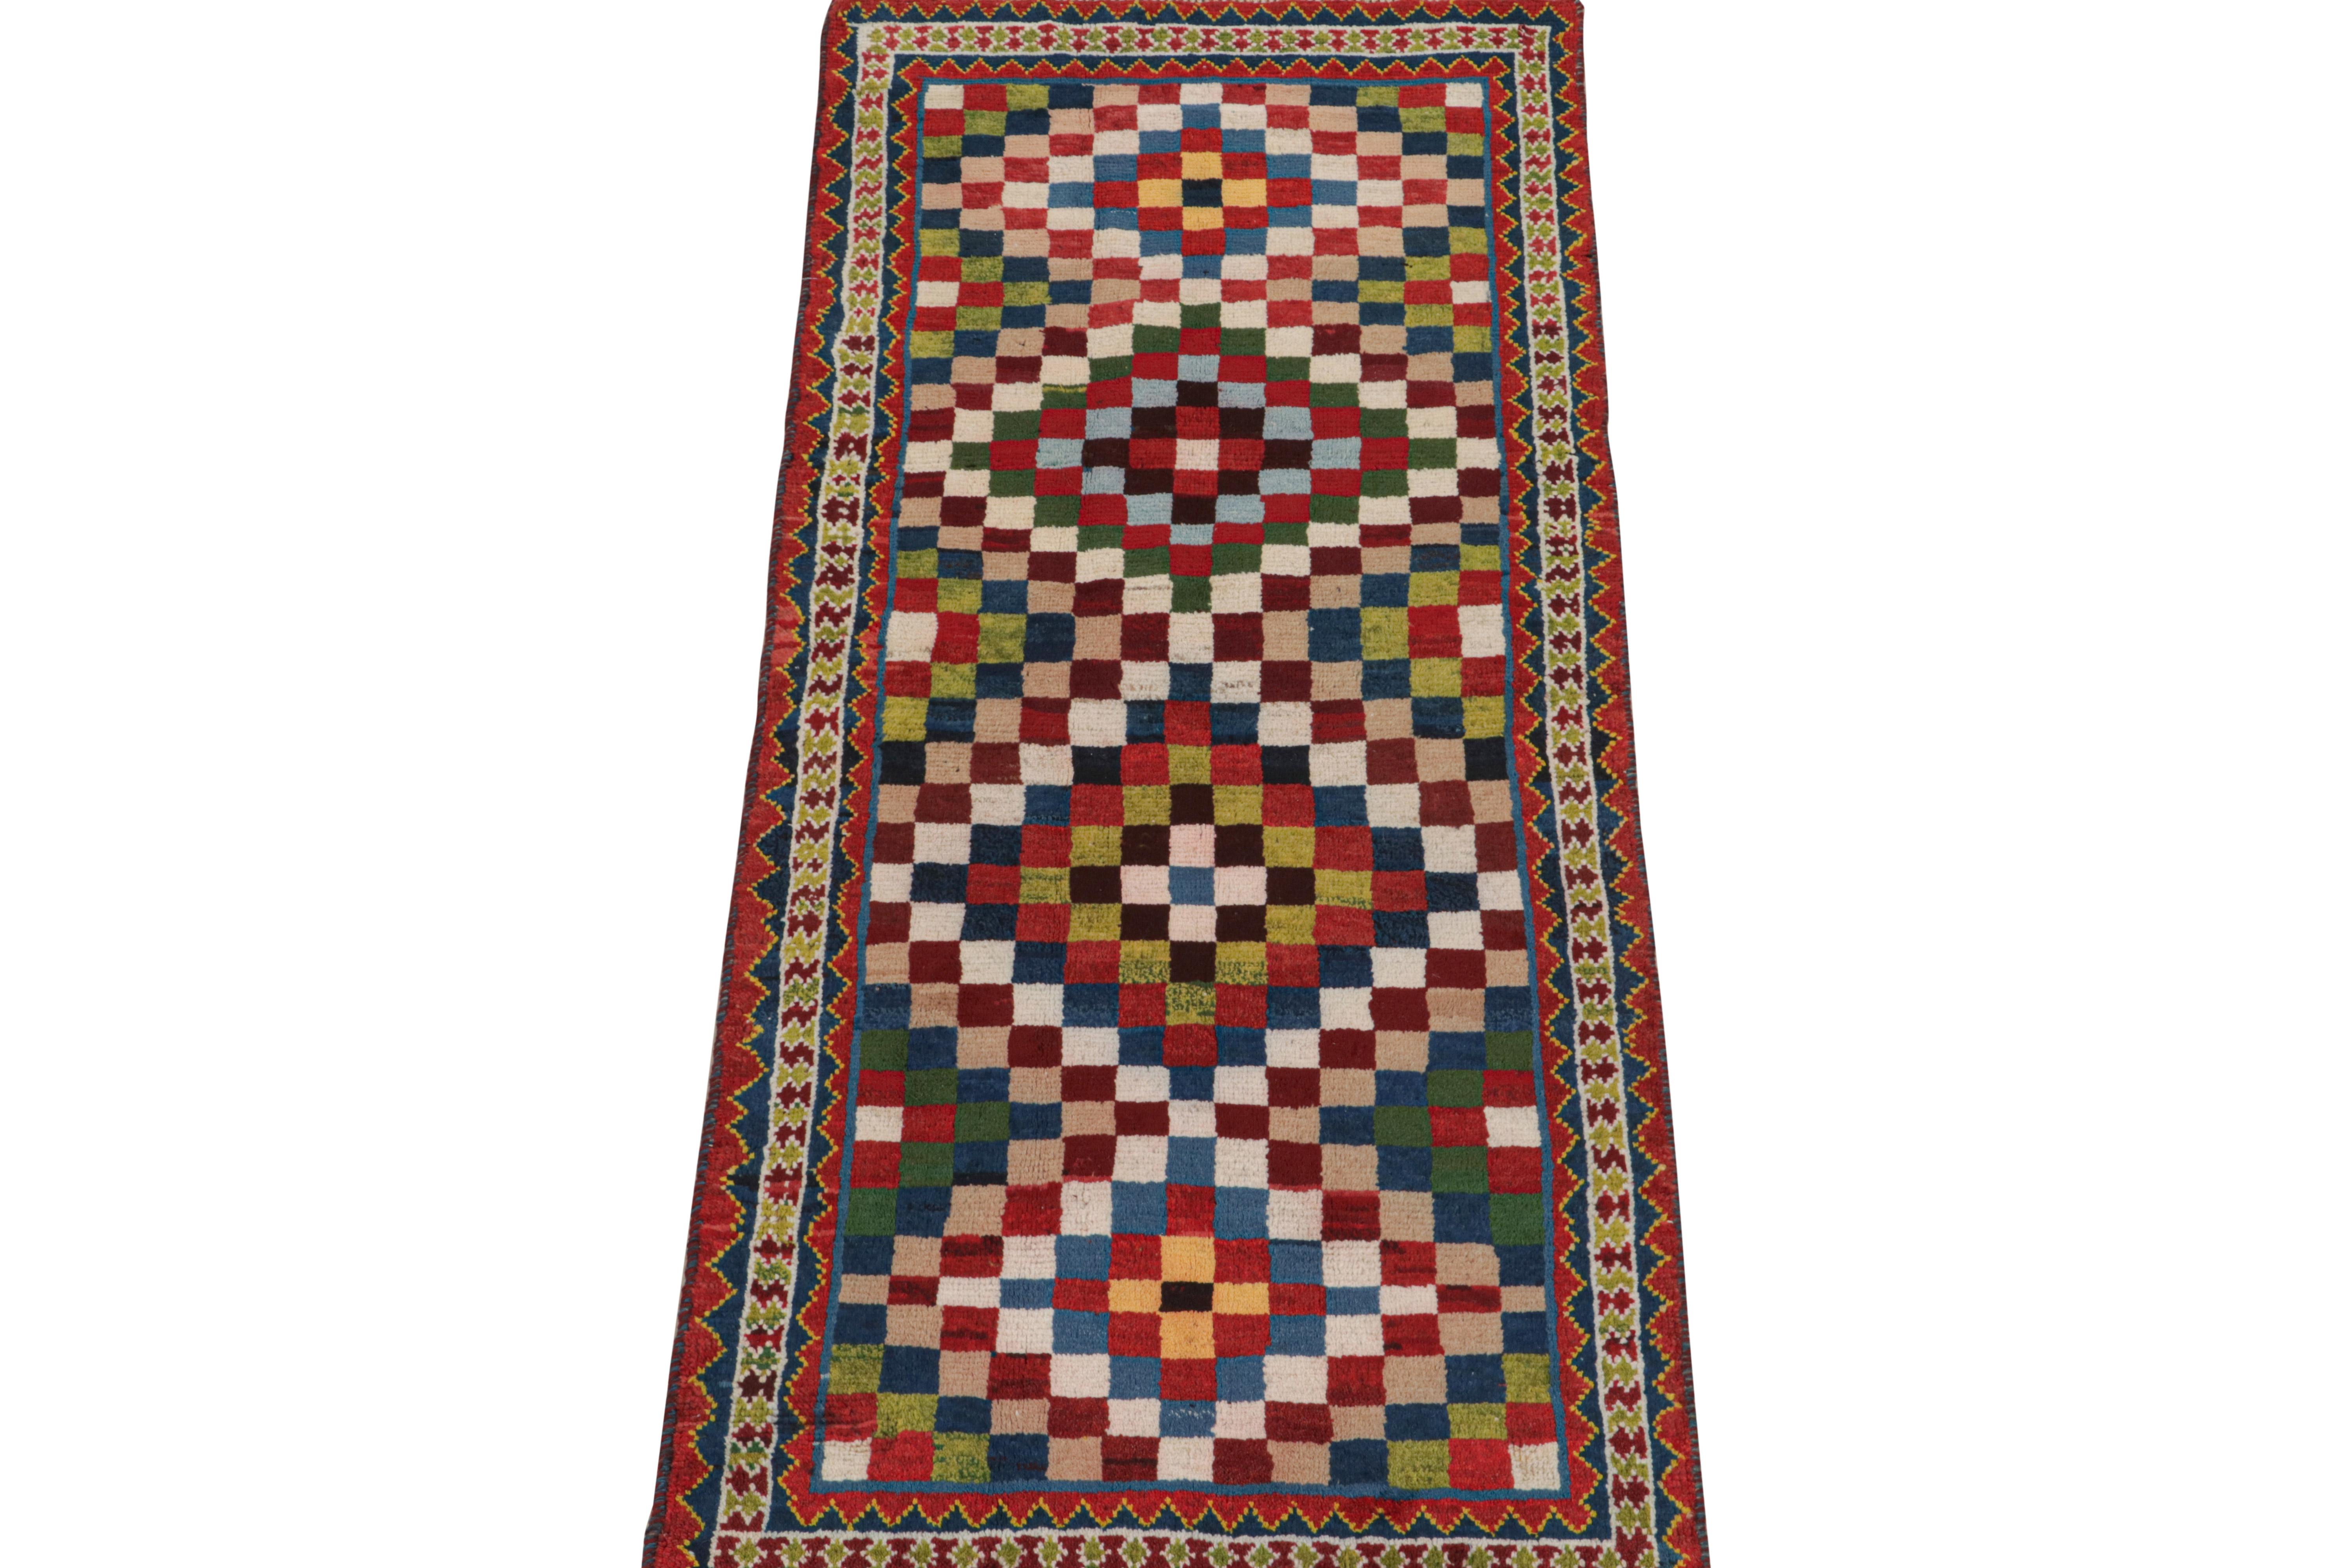 This vintage 3x7 Persian runner is a Gabbeh rug that originates from the Qashqai tribe—hand-knotted in wool circa 1950-1960.

The design enjoys a mosaic-like geometric pattern with vibrant polychromatic colors—especially bright green, blue, and